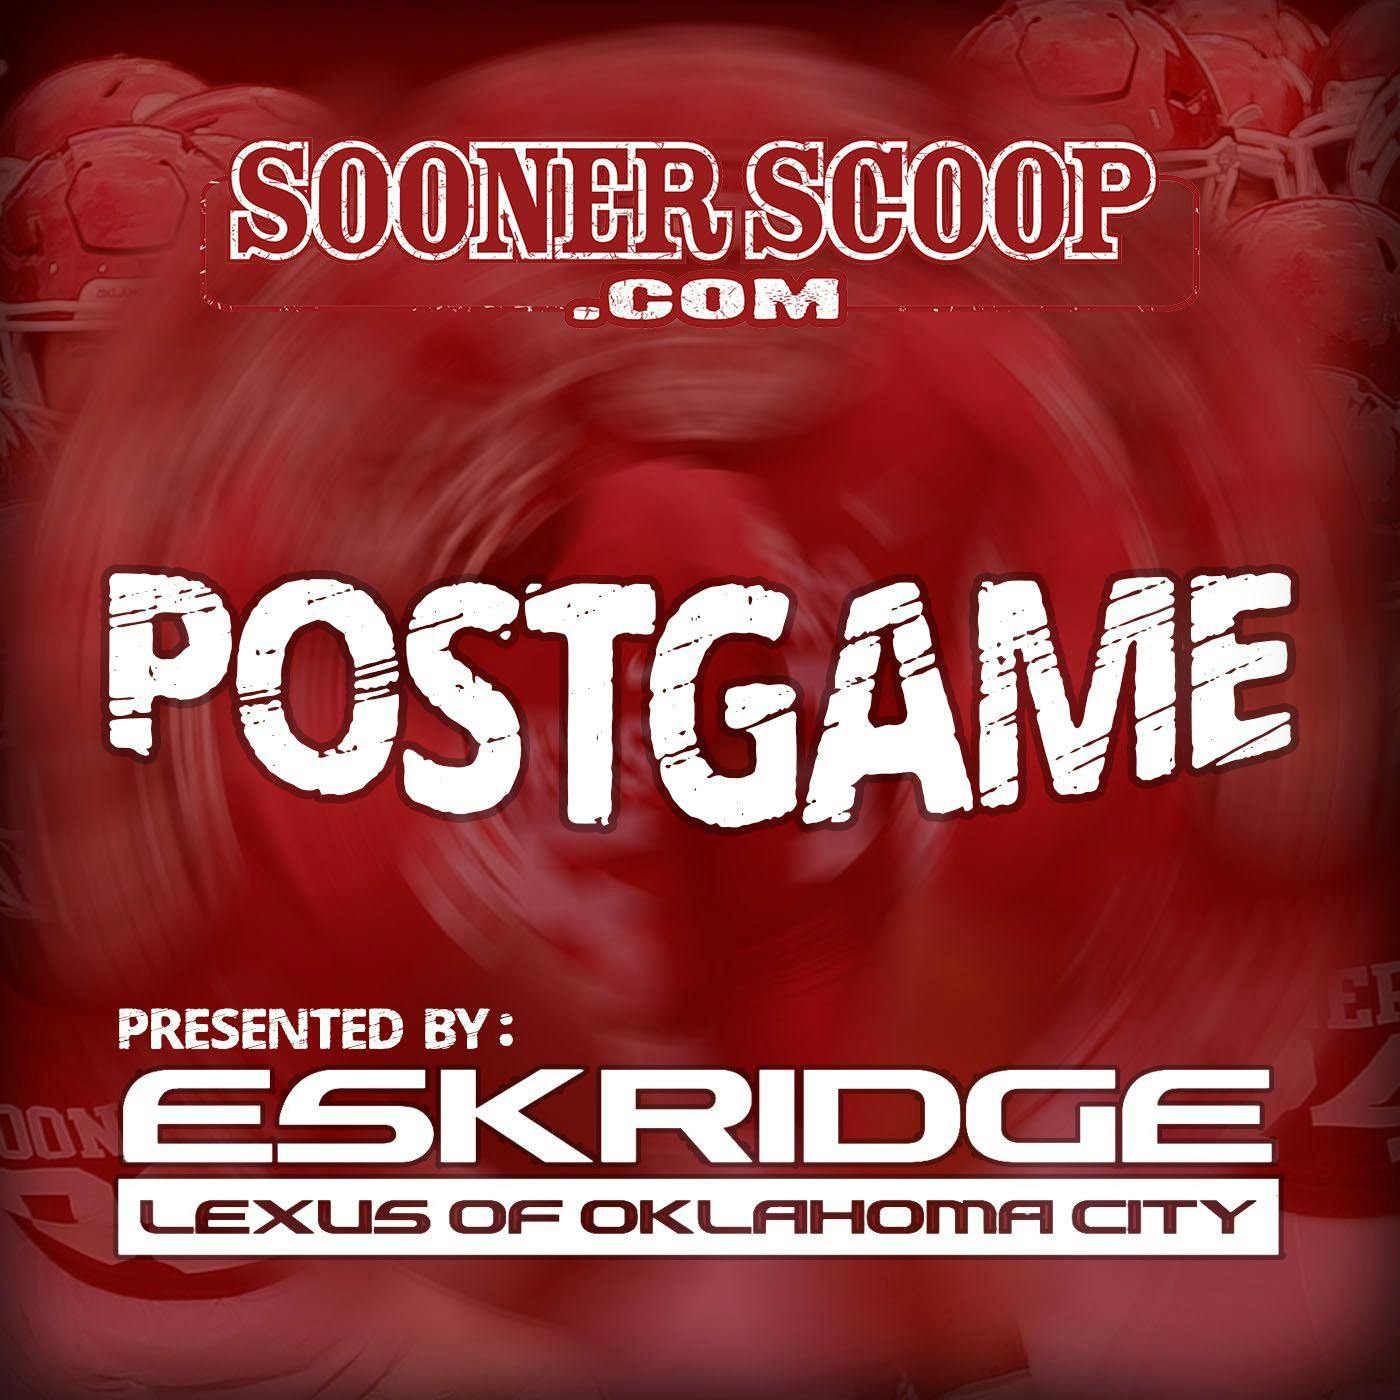 Postgame: Looking for answers as to why OU can’t take it to the next level